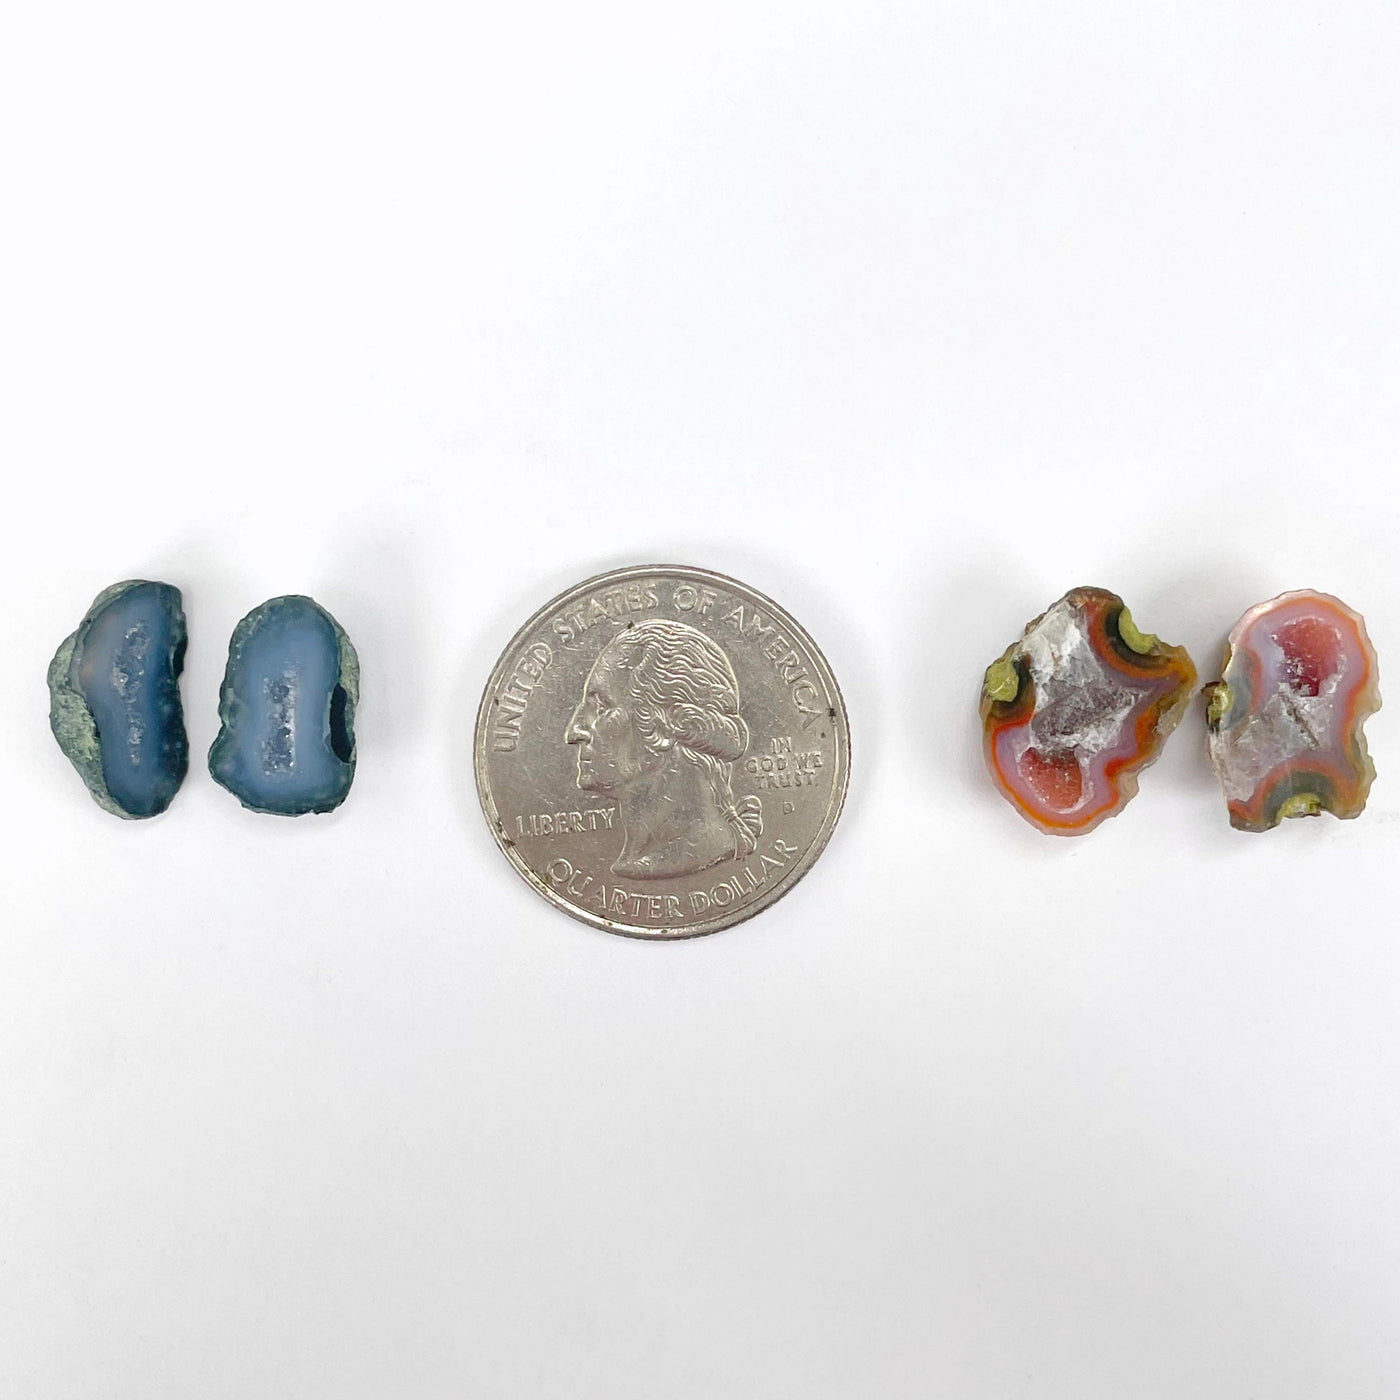 approximate smallest high grade mini geode pairs with quarter for size reference